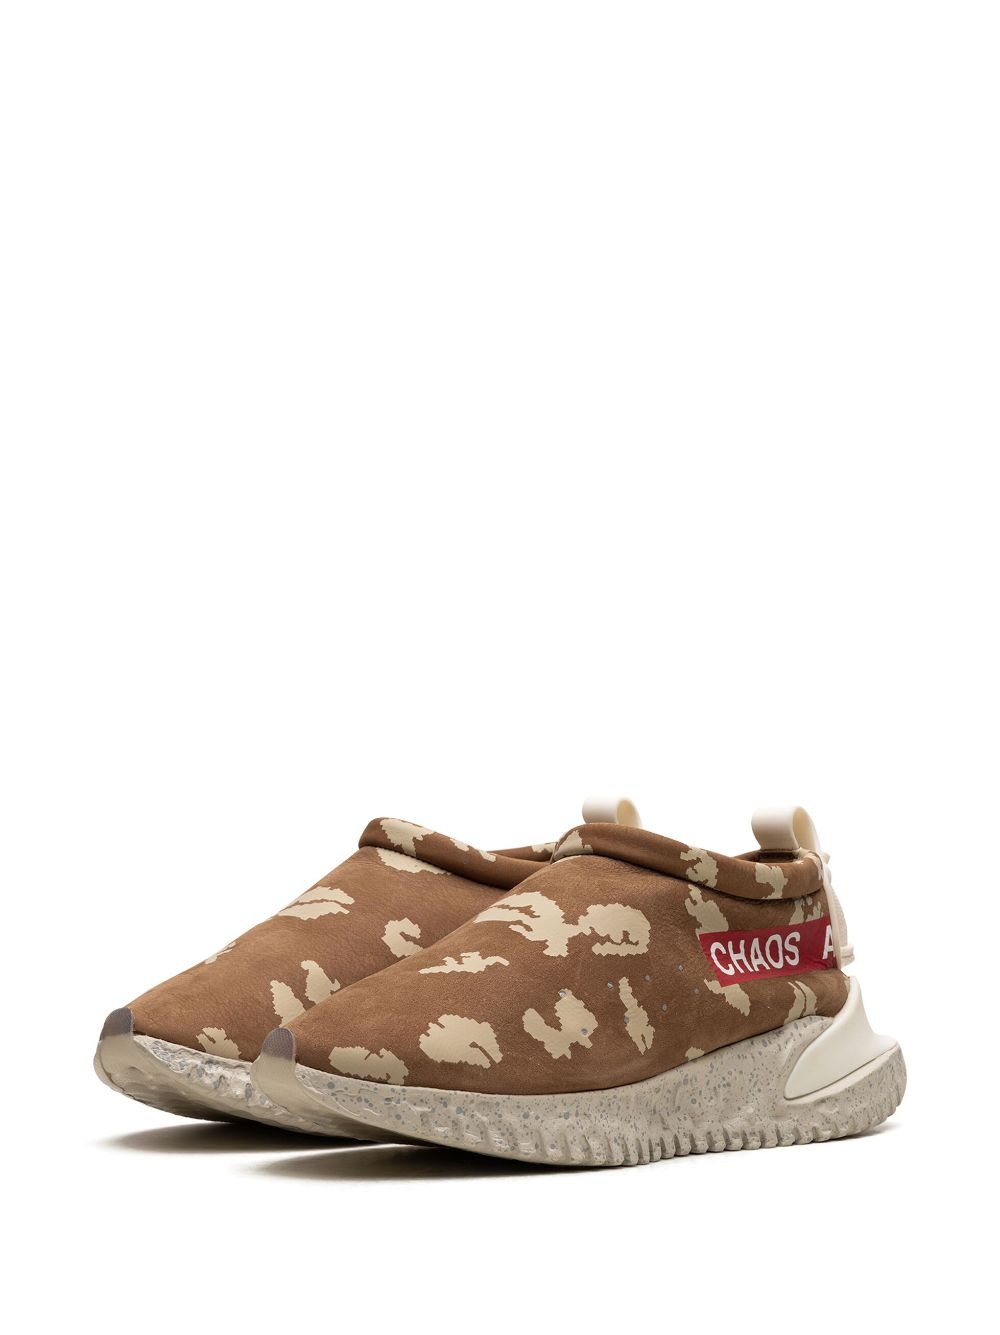 x UNDERCOVER Moc Flow "Ale Brown" sneakers - 4